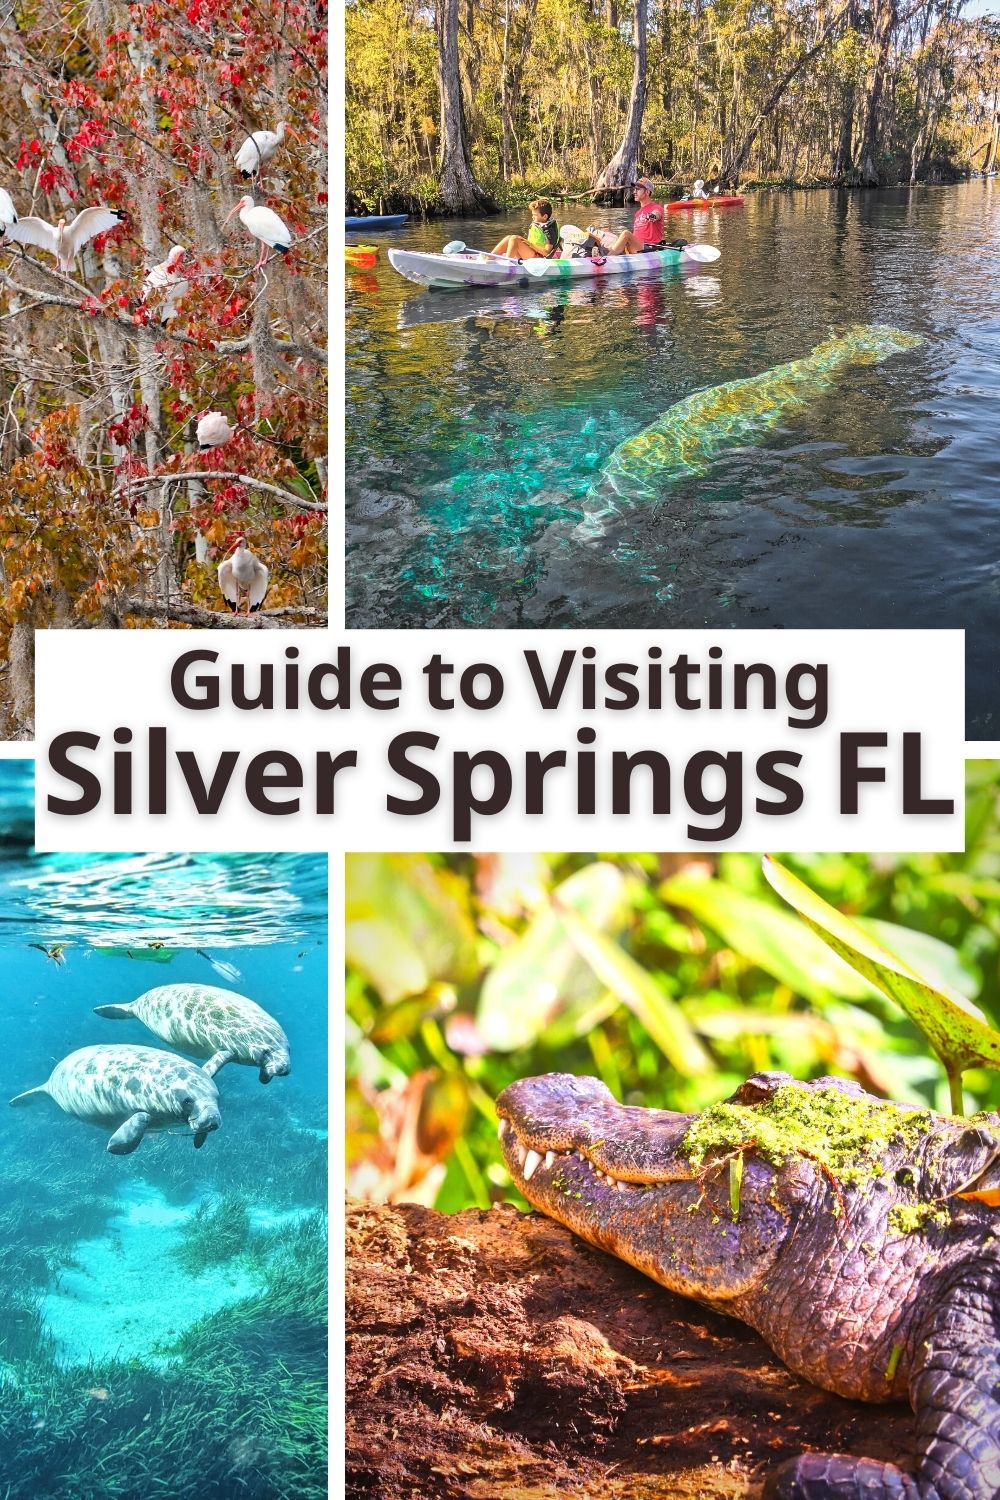 Silver Springs State Park is one of the prettiest places in Florida, and perhaps the best state park. Guide to manatees, kayaking, trails, glass bottom boats and visiting Silver Springs.